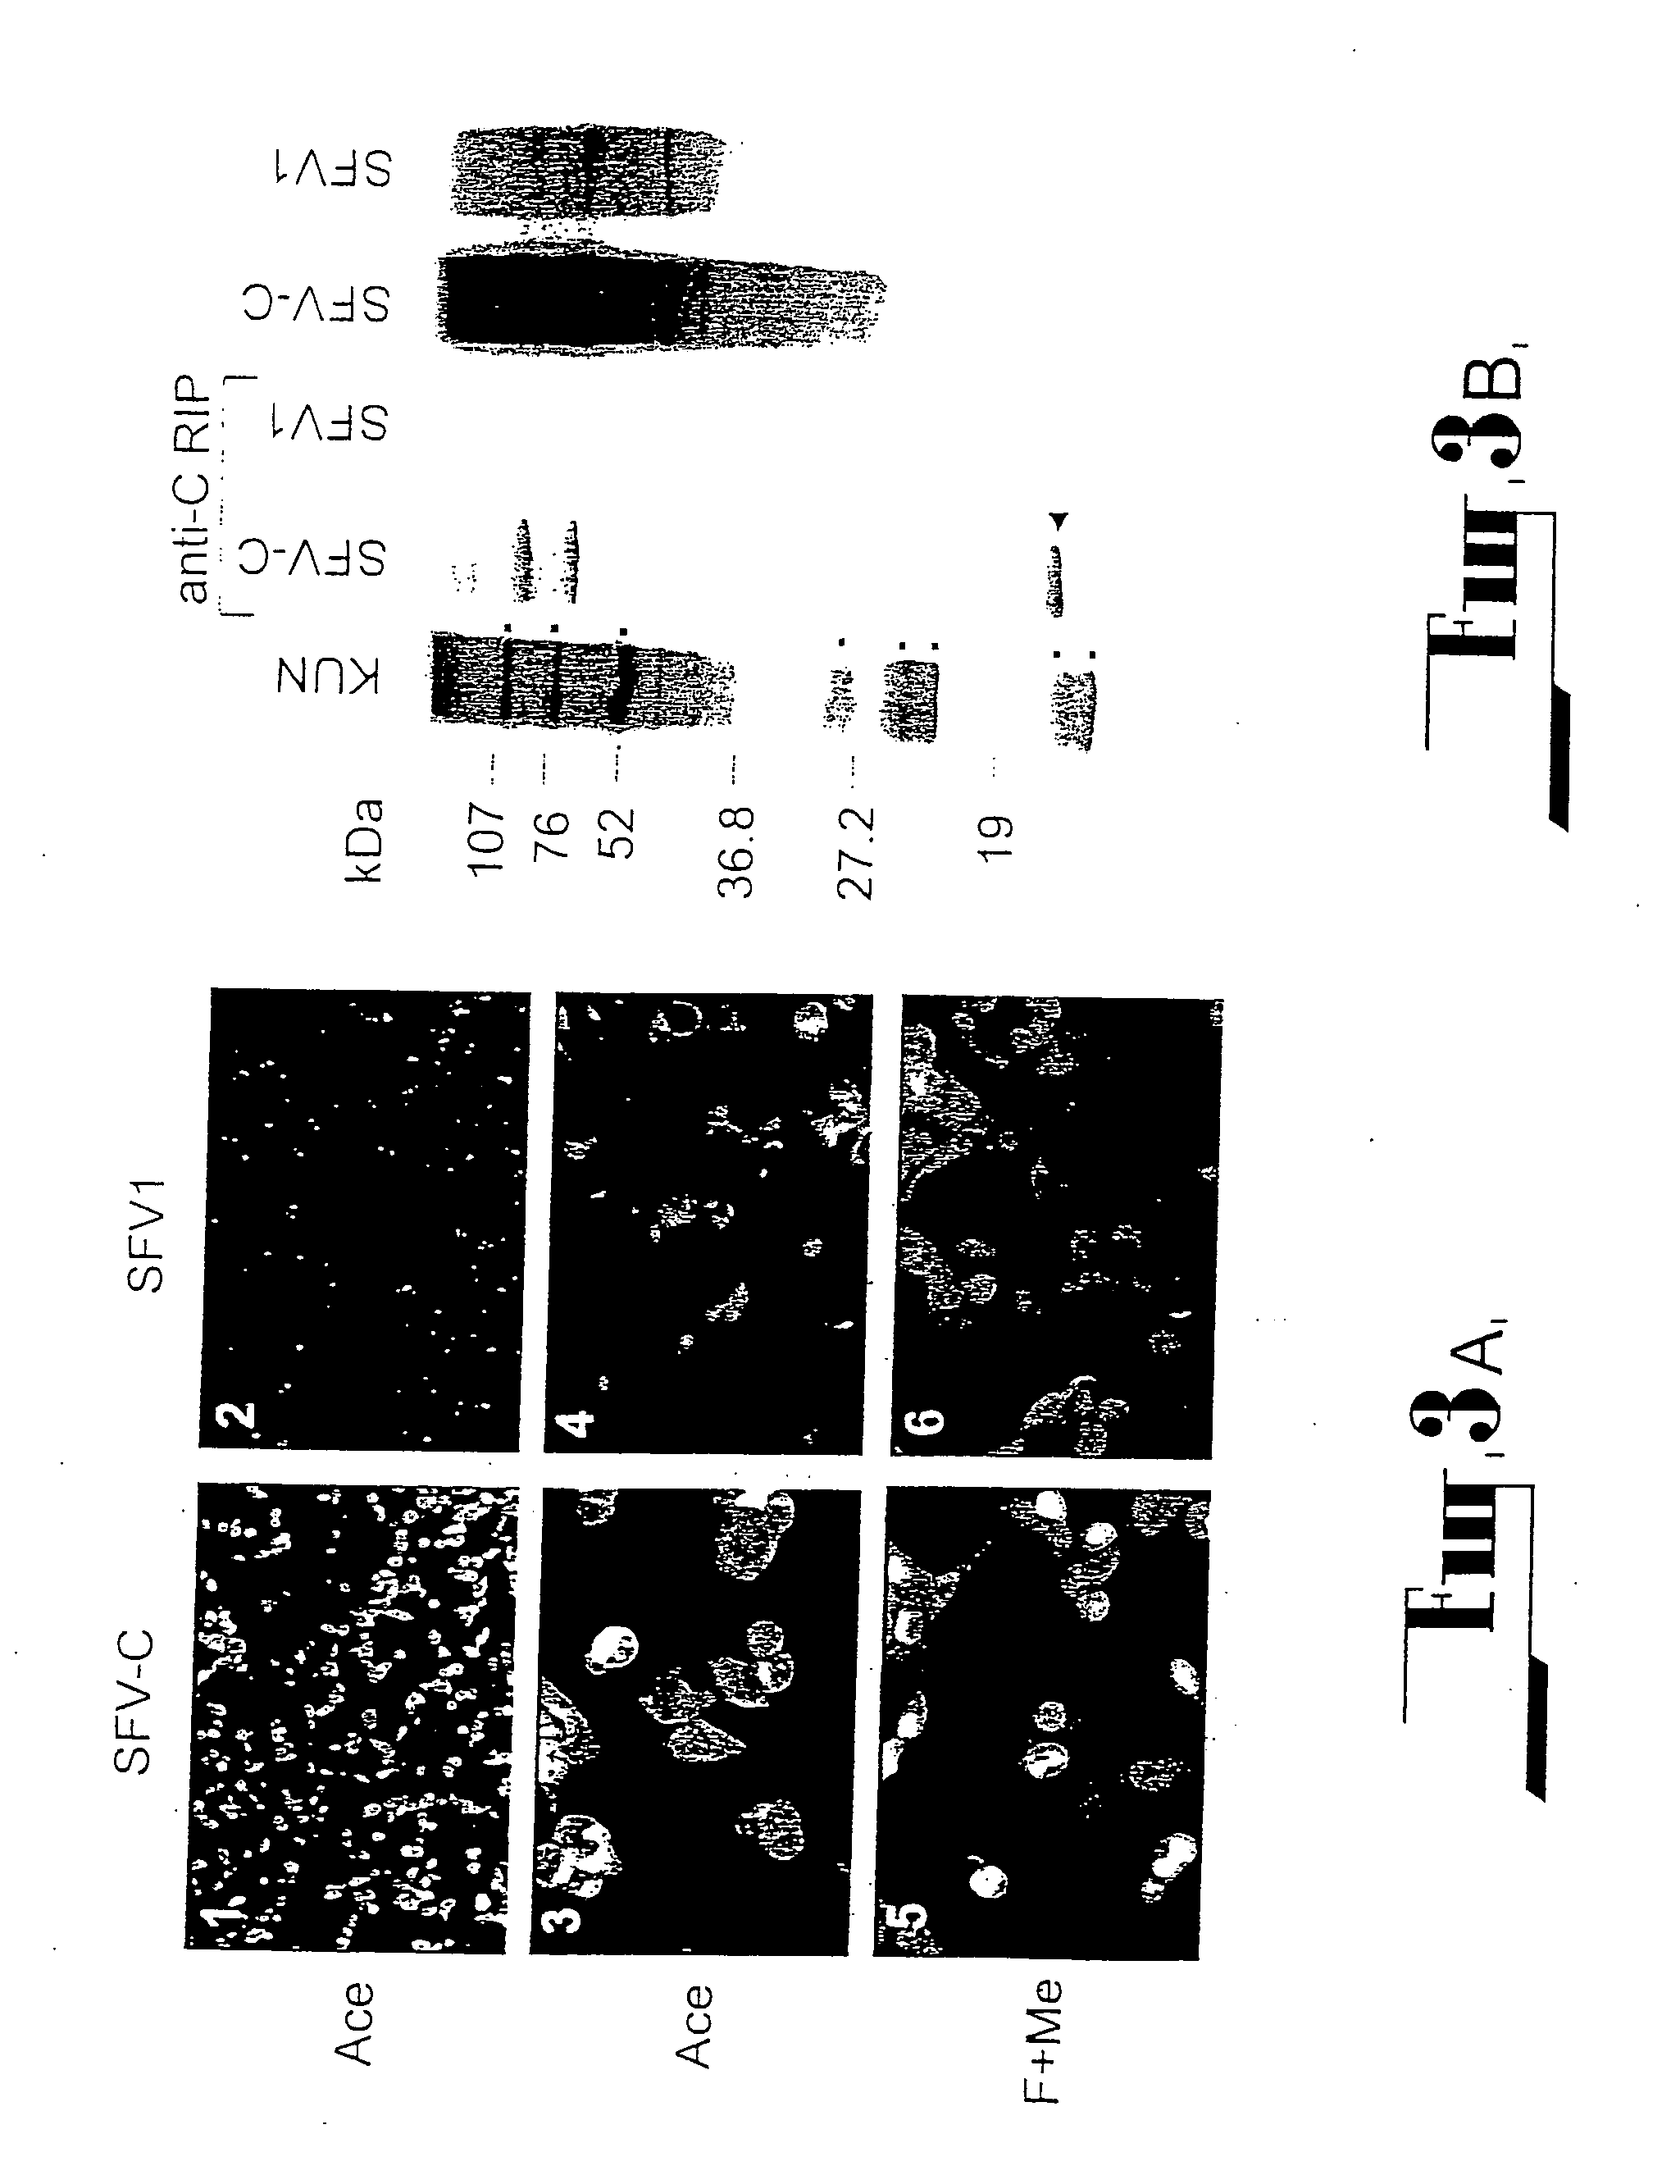 Flavivirus expression and delivery system